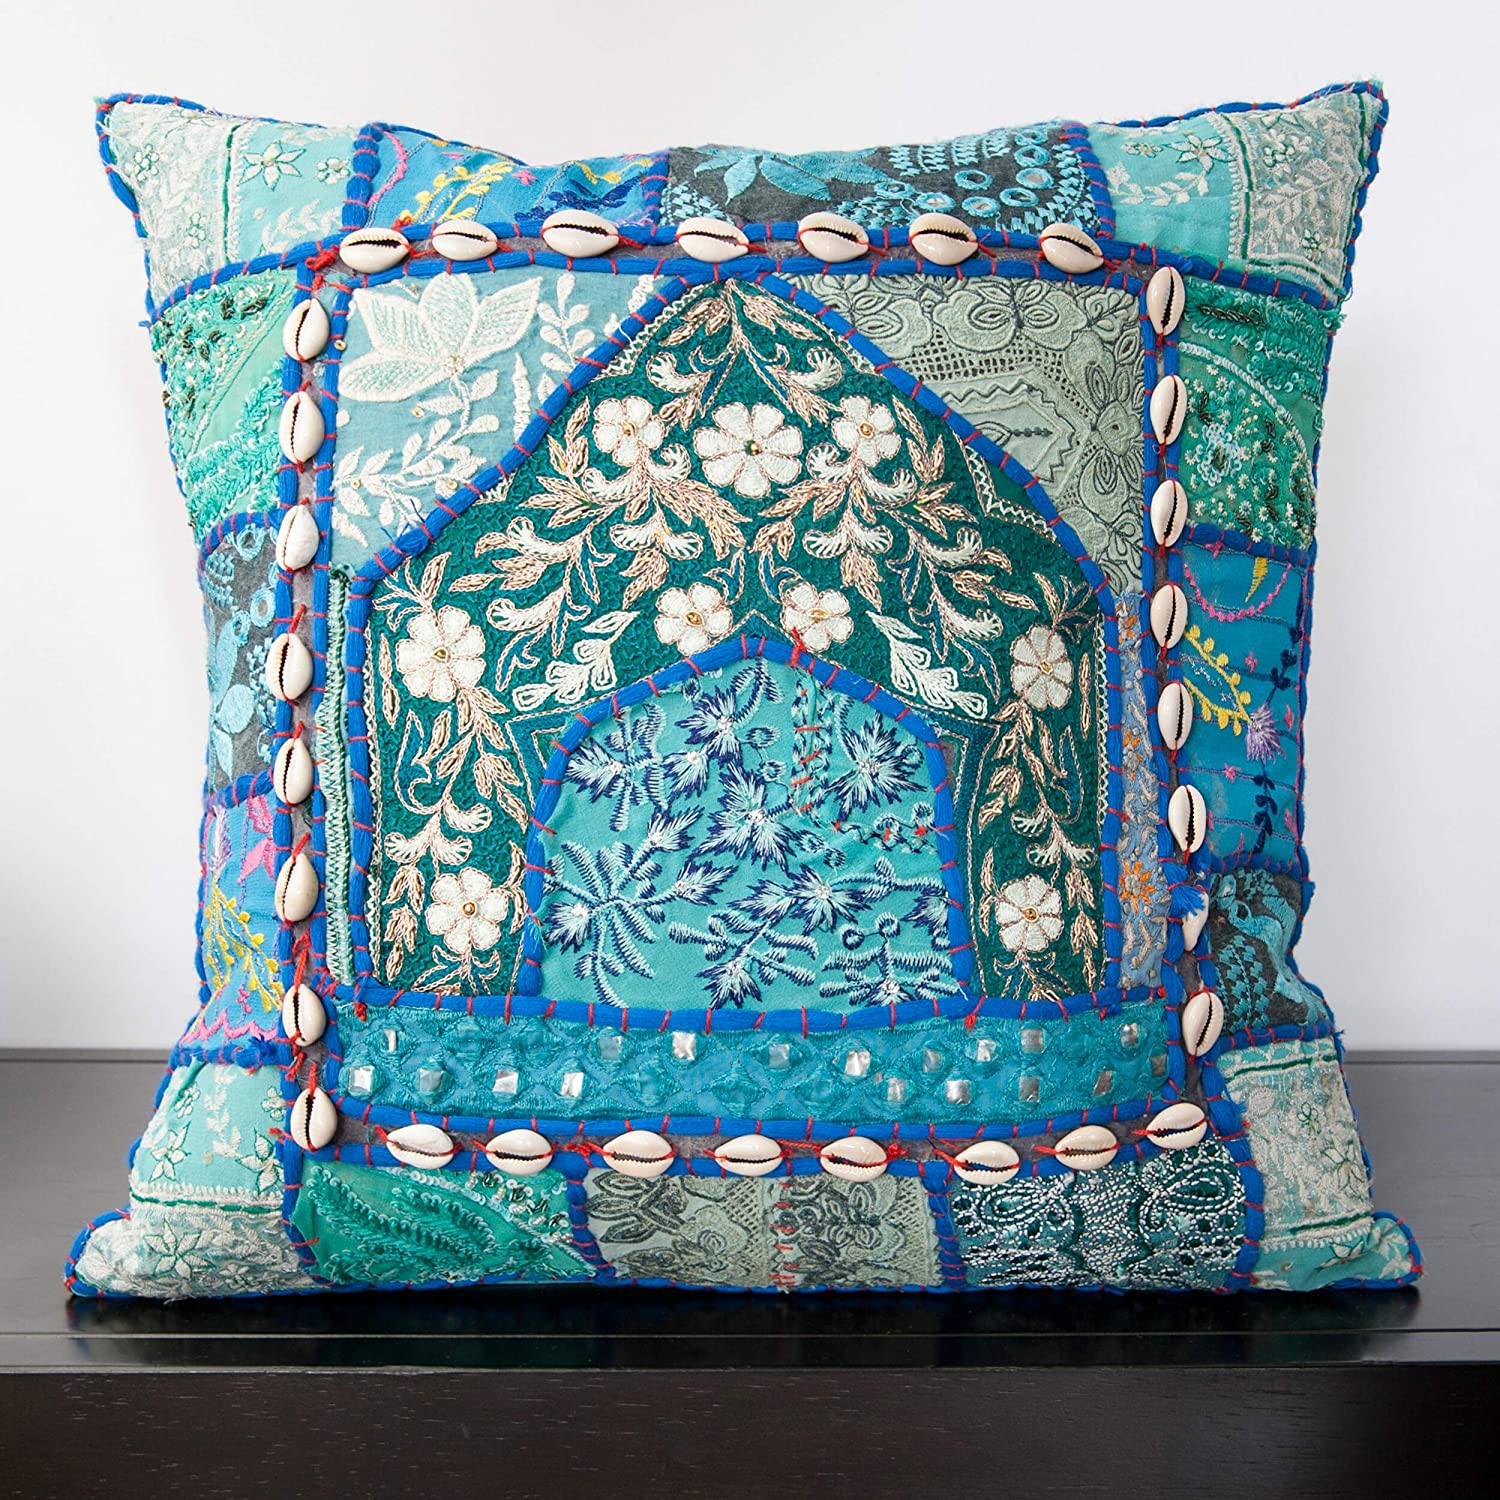 MISC Blue Patchwork 22 inch Decorative Feather Down Pillow Nautical Coastal Cotton Polyester Single